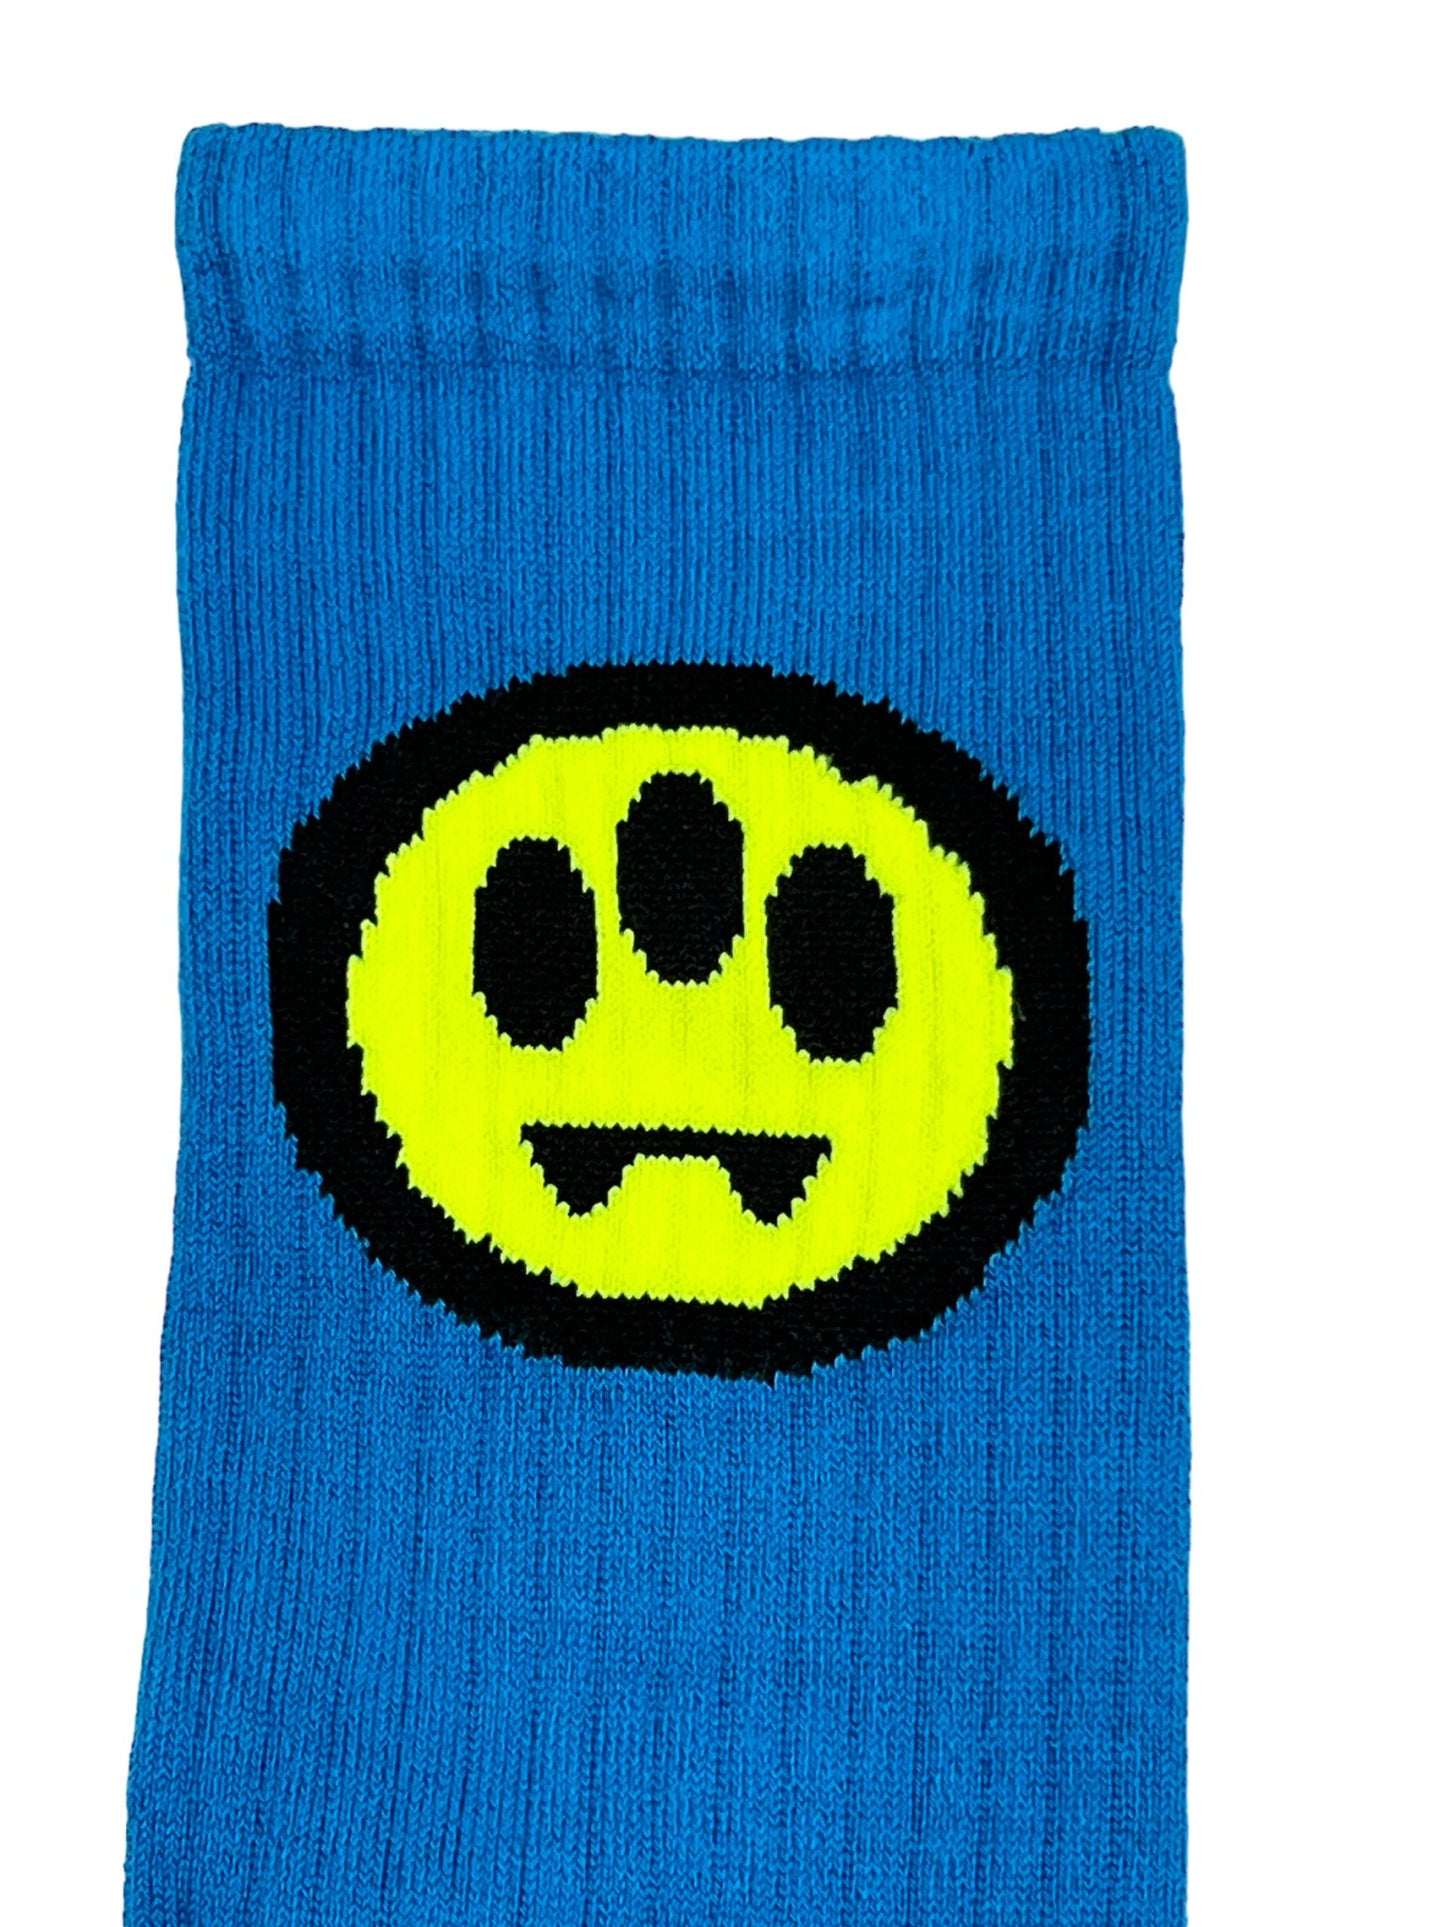 BARROW Blue sock featuring a green, black, and yellow smiley face design on the ankle area.